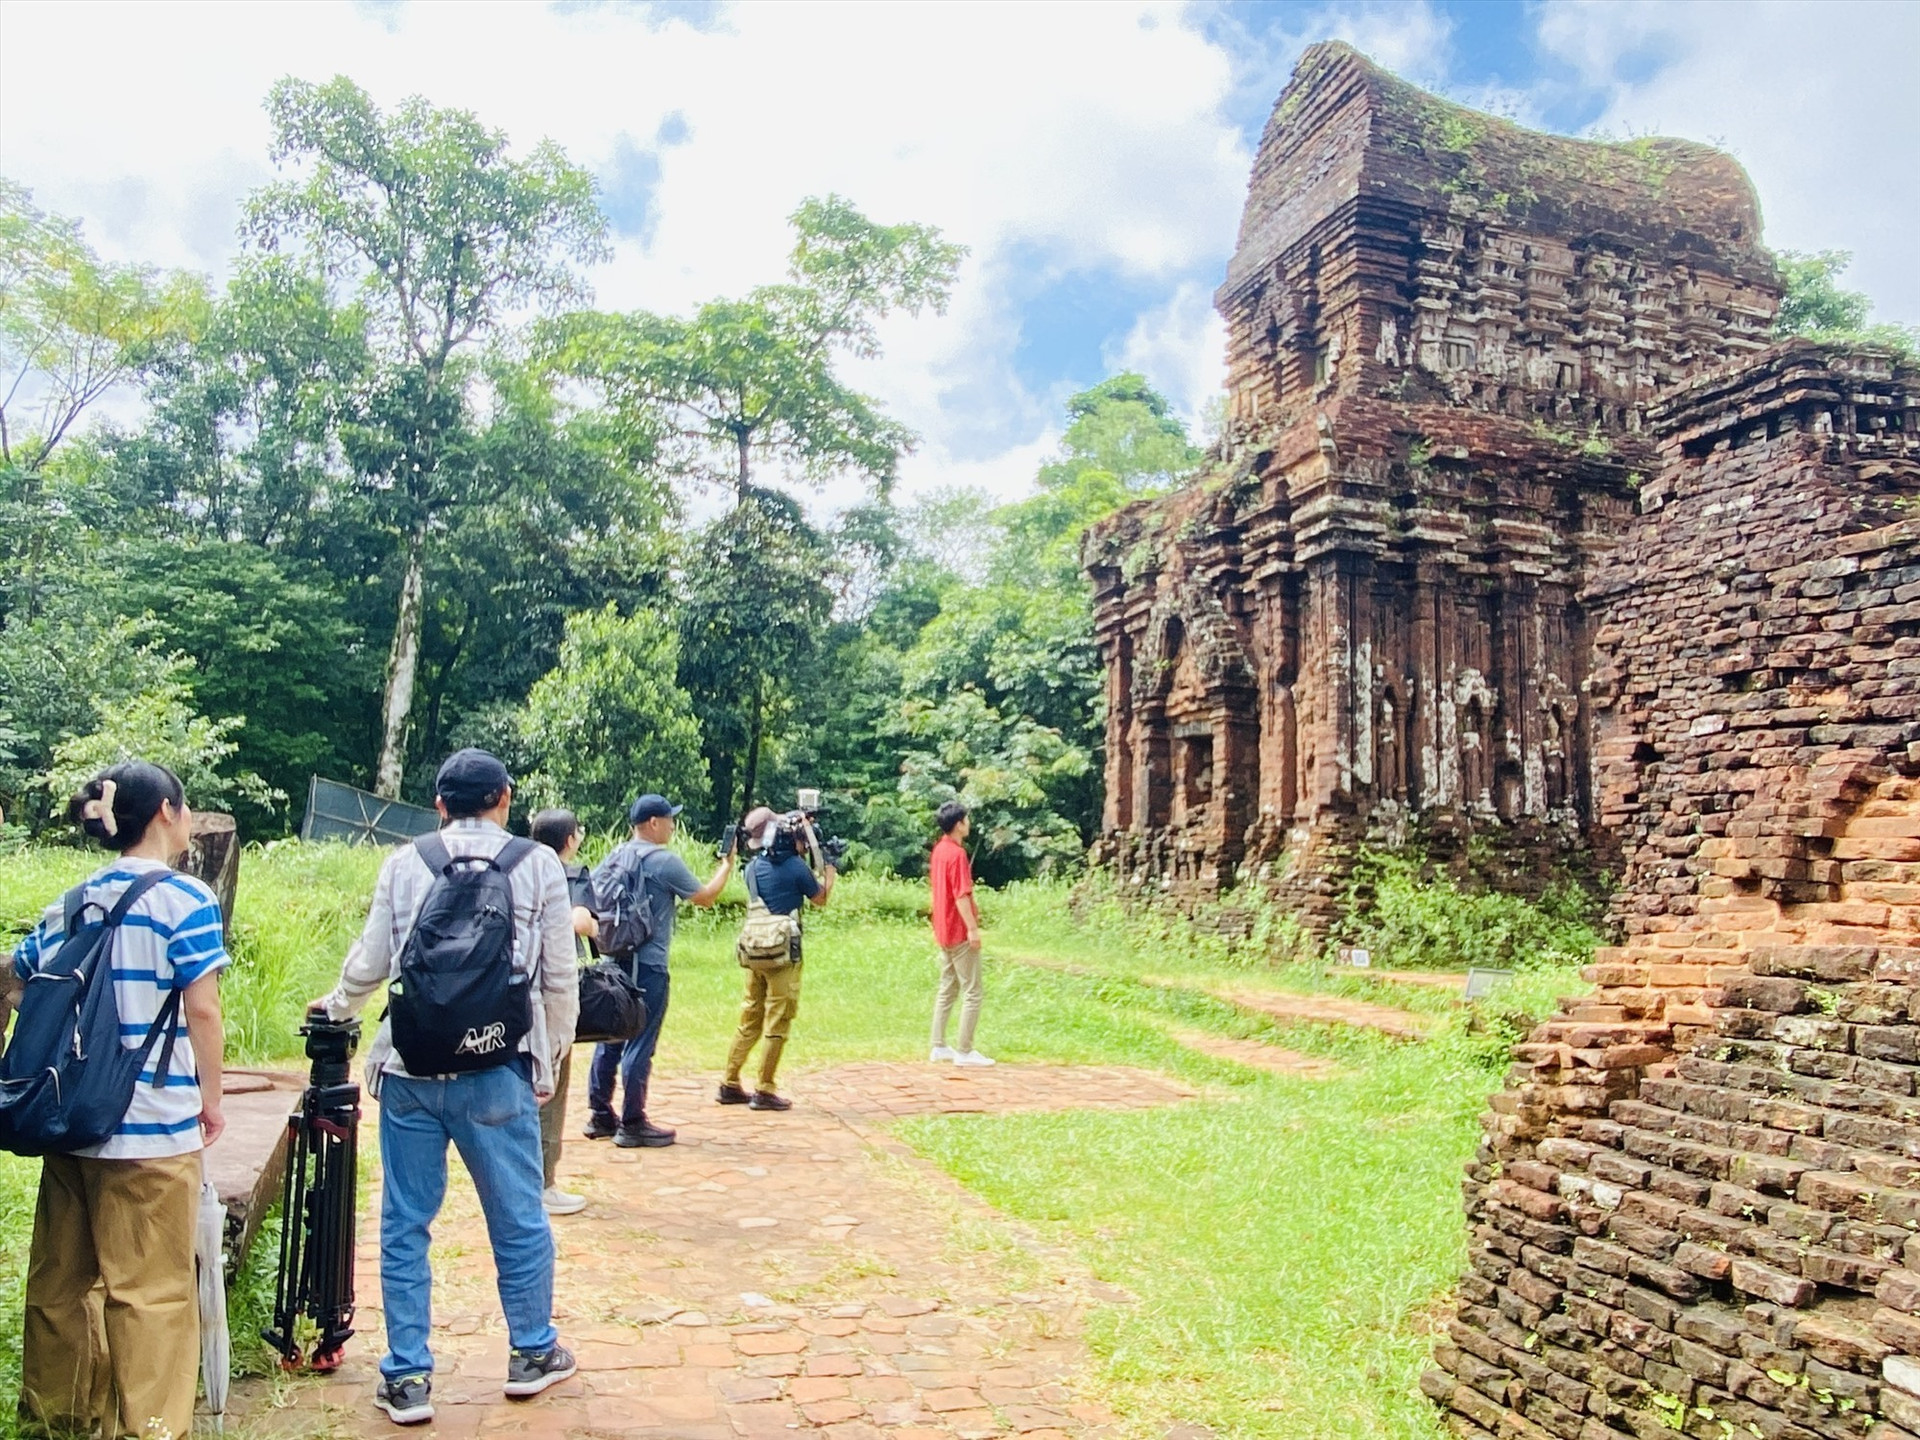 The Japanese film crew worked at My Son Sanctuary.